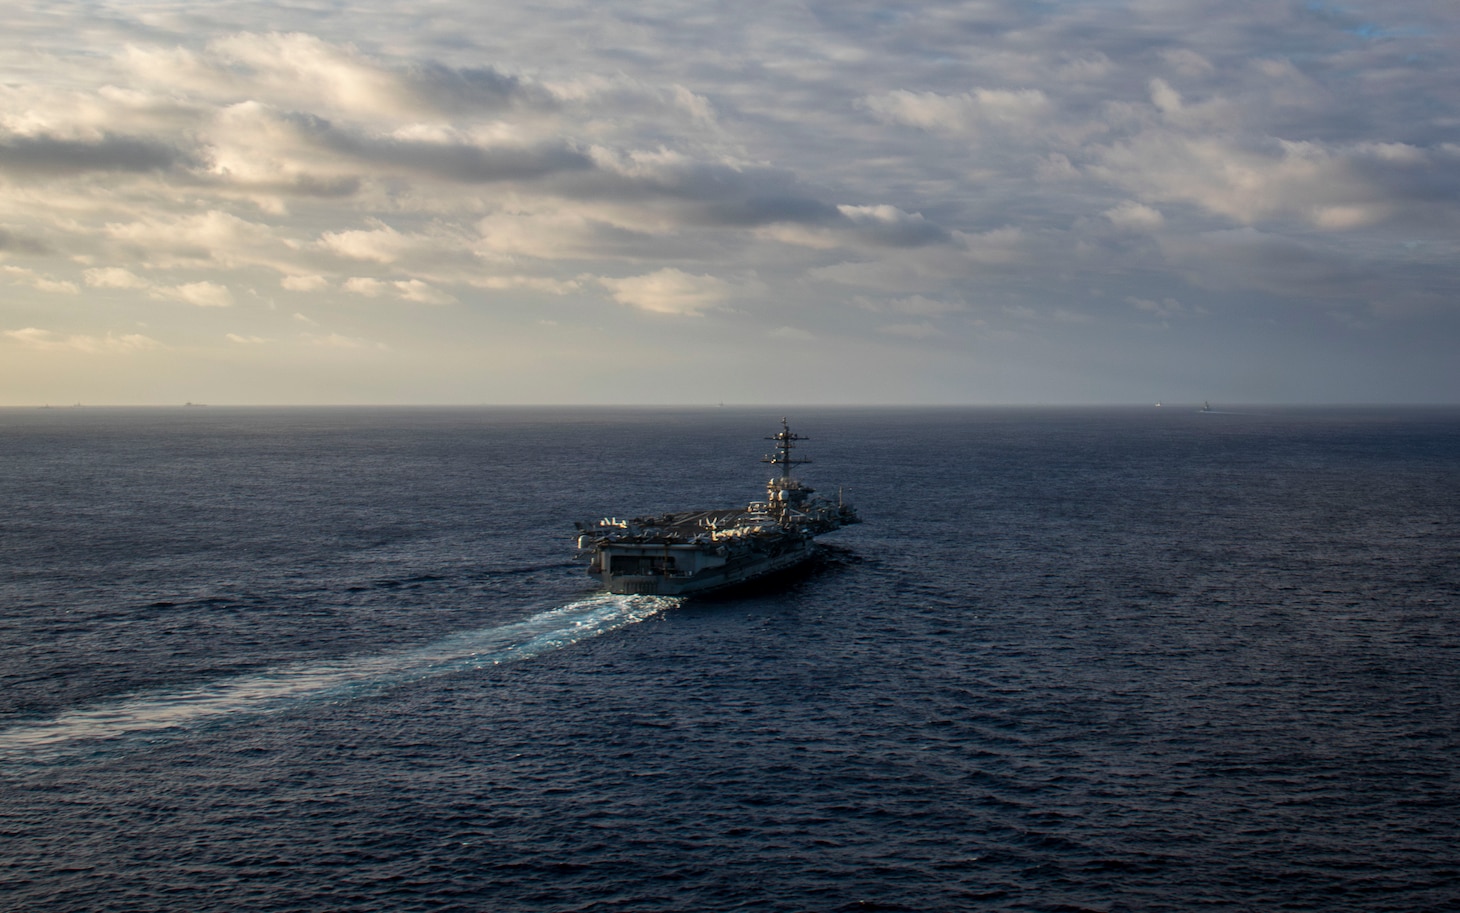 231110-N-TD381-1048 PHILIPPINE SEA (Nov. 10, 2023) Nimitz-class aircraft carrier USS Carl Vinson (CVN 70) transits the Pacific Ocean during Annual Exercise (ANNUALEX) 2023. ANNUALEX is a multilateral exercise conducted by naval elements of the Royal Australian, Royal Canadian, Japan Maritime Self-Defense Force, and U.S. navies to demonstrate naval interoperability and a joint commitment to a free and open Indo-Pacific. Vinson, flagship of Carrier Strike Group ONE, is deployed to the U.S. 7th Fleet area of operations in support of a free and open Indo-Pacific. (U.S. Navy photo by Mass Communication Specialist 3rd Class Isaiah Goessl)